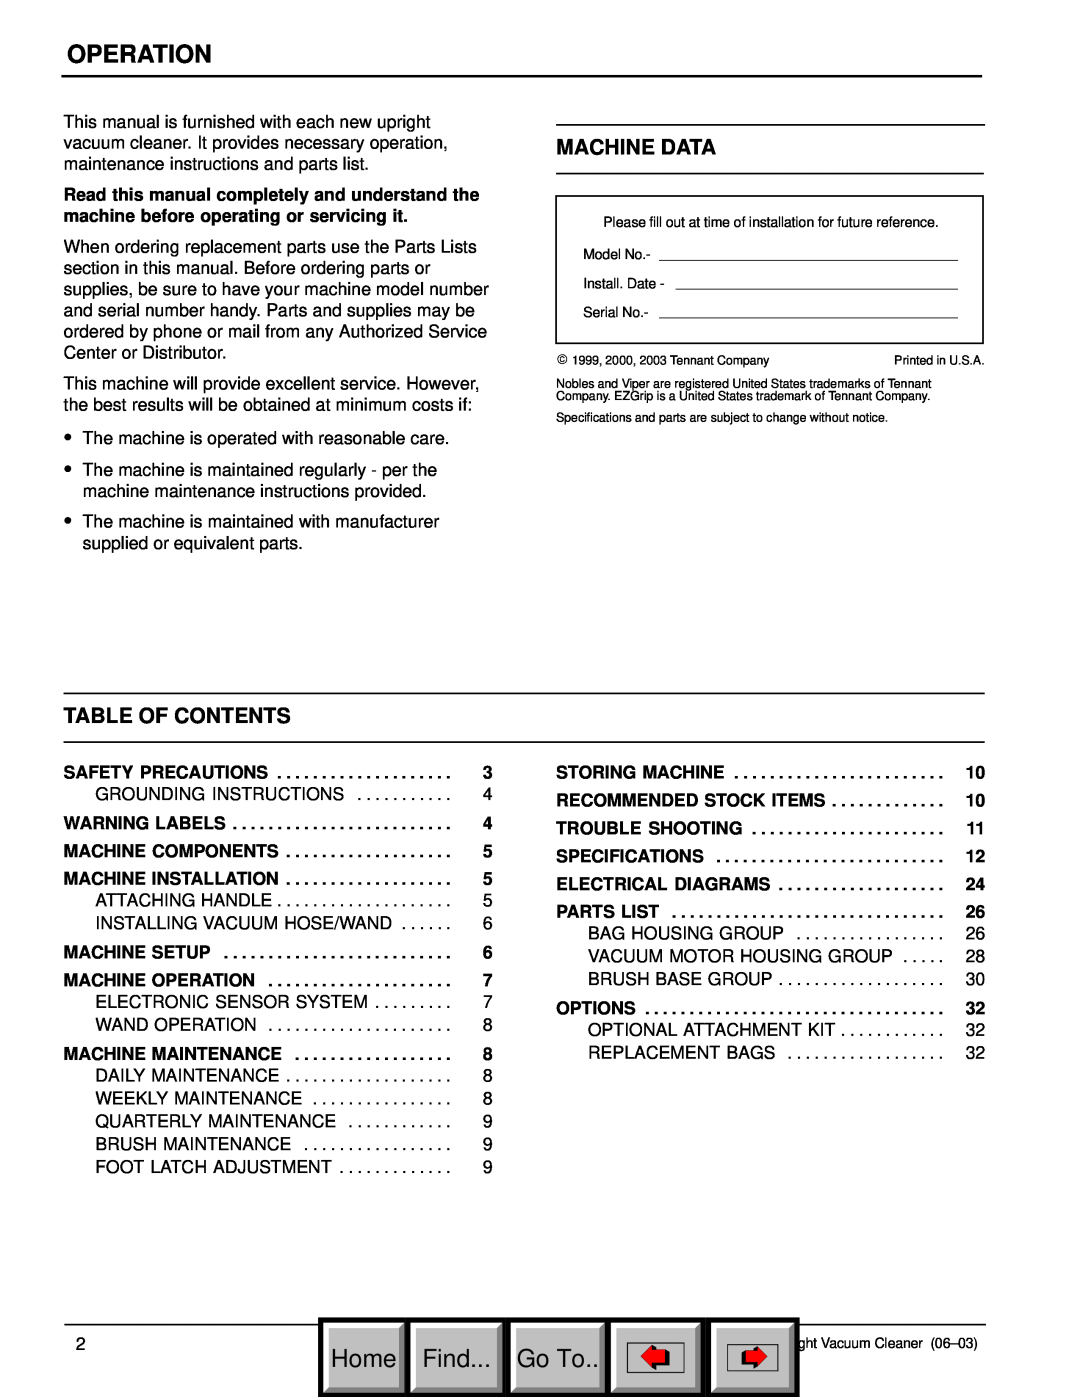 Philips 608669 manual Operation, Home Find, Go To, Machine Data, Table Of Contents 